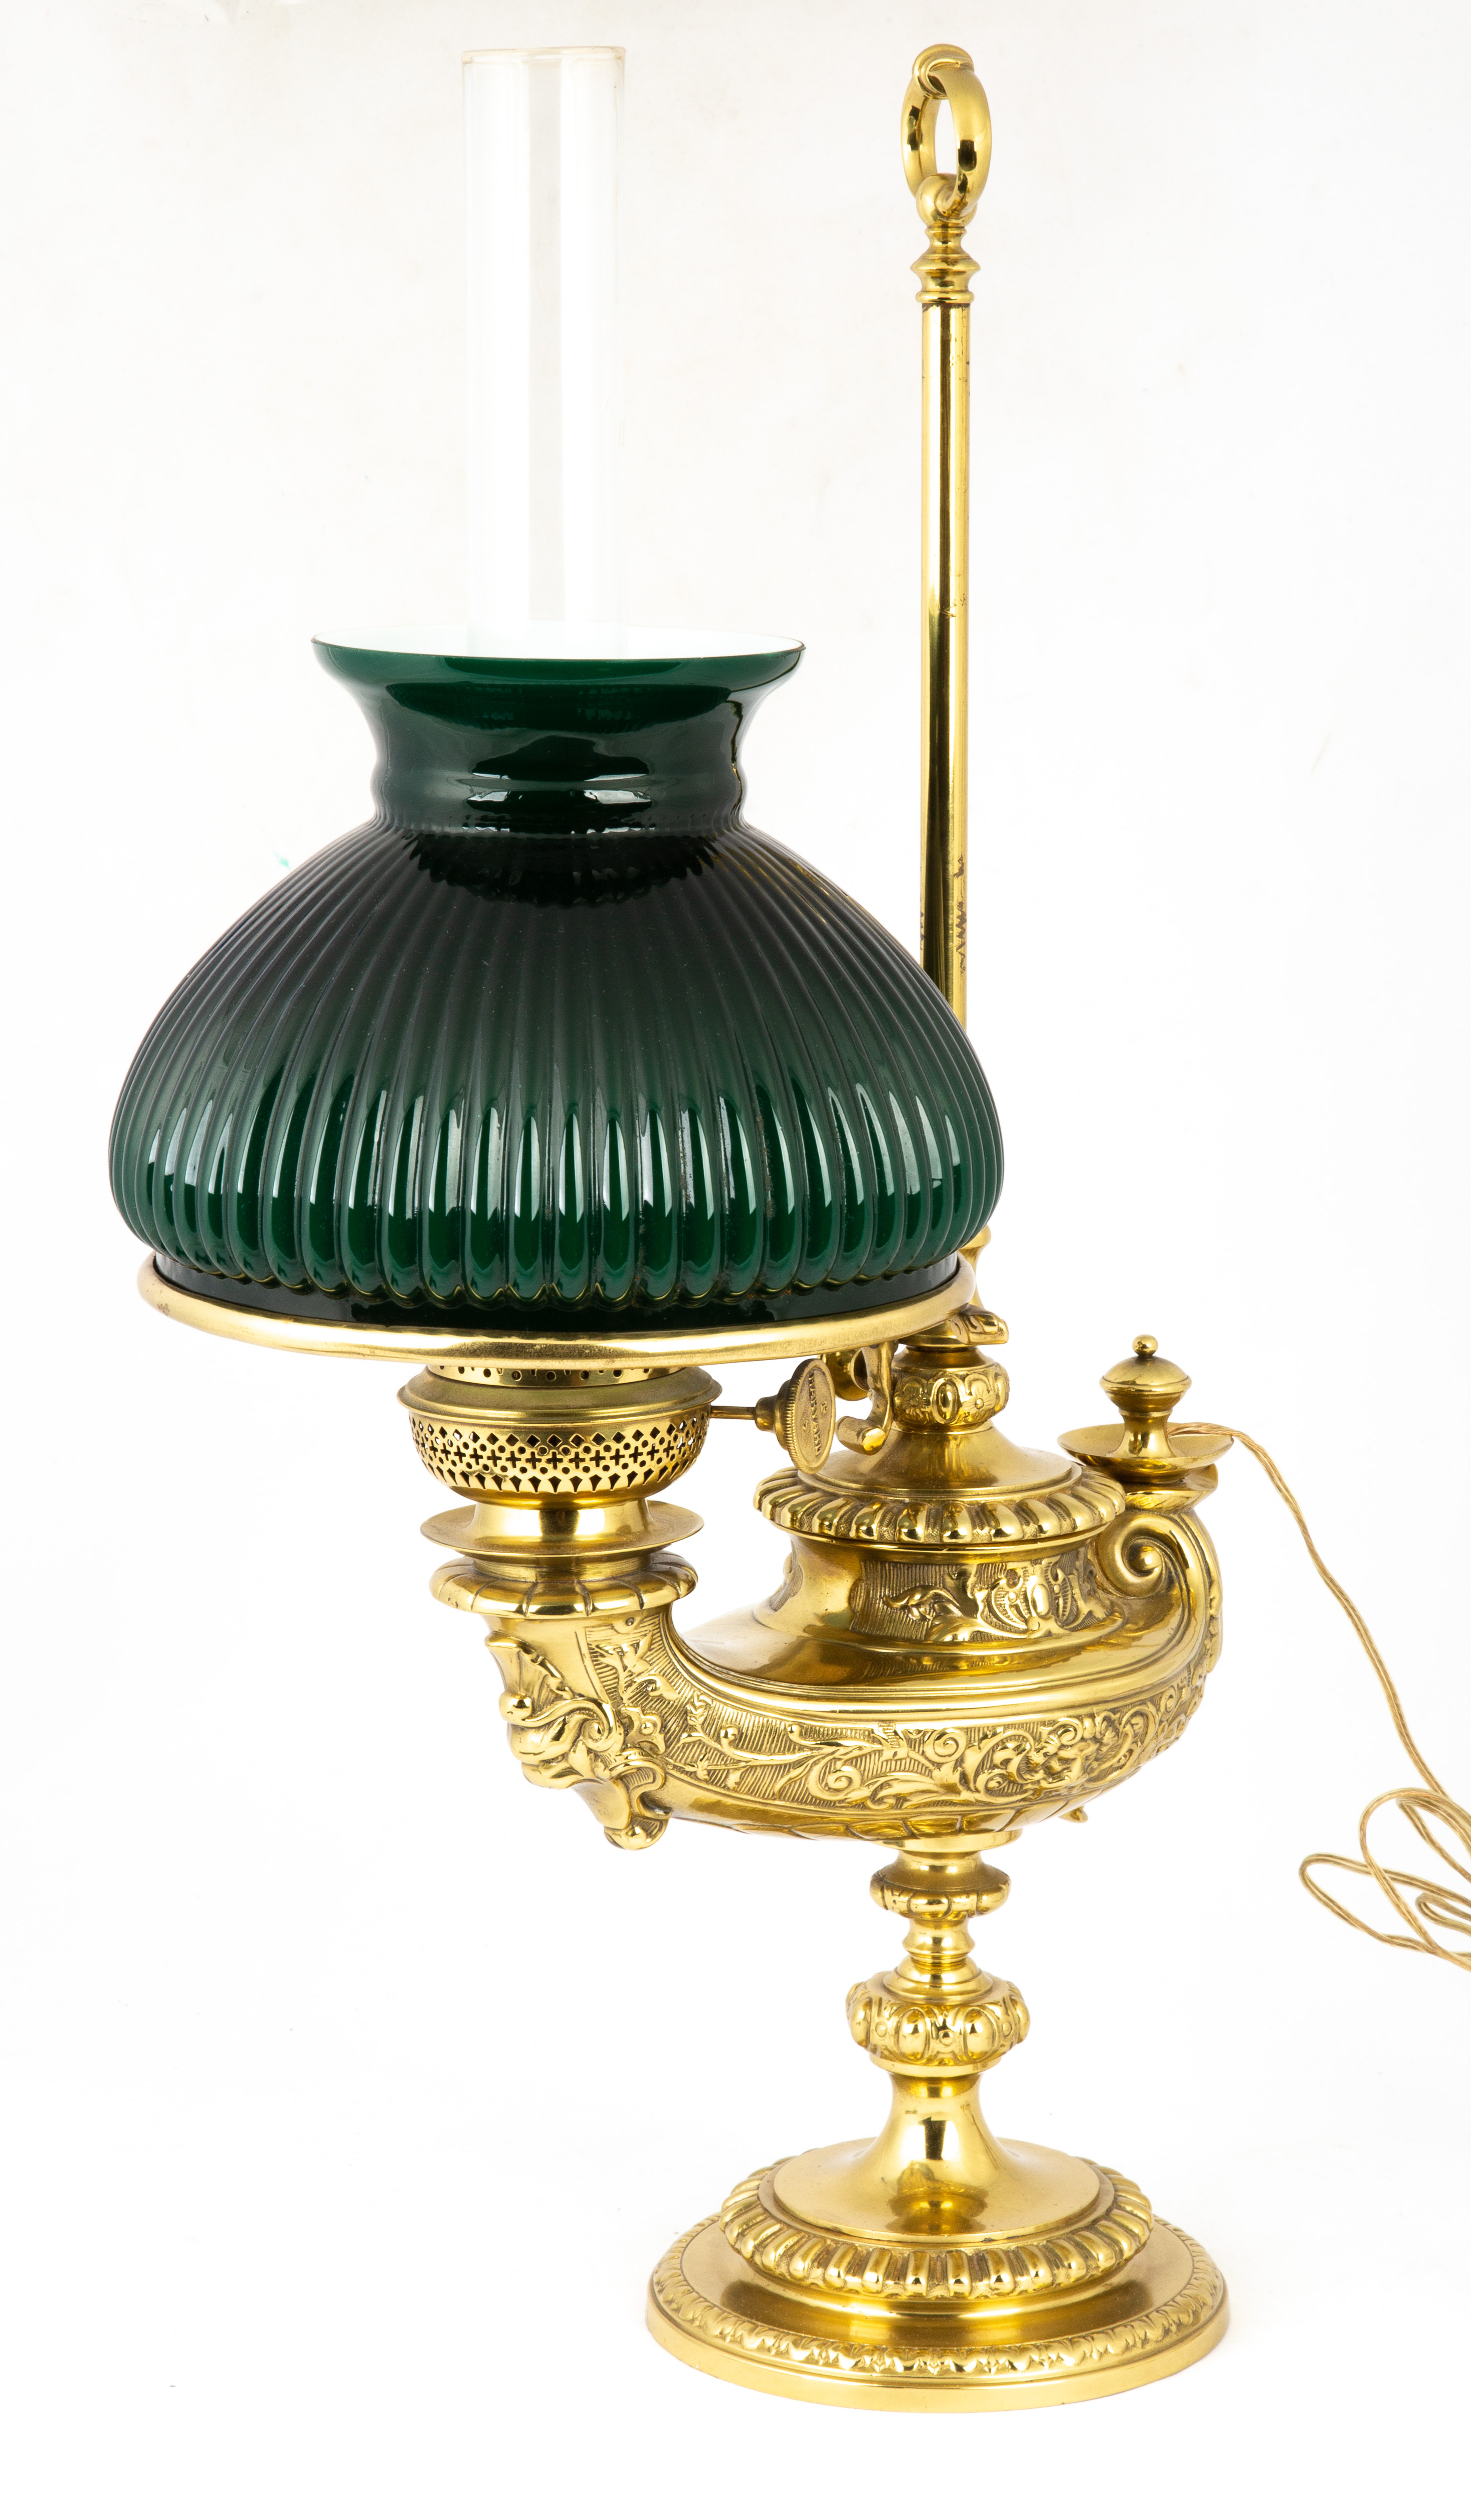 HARVARD STUDENT LAMP The Plume 3529a1